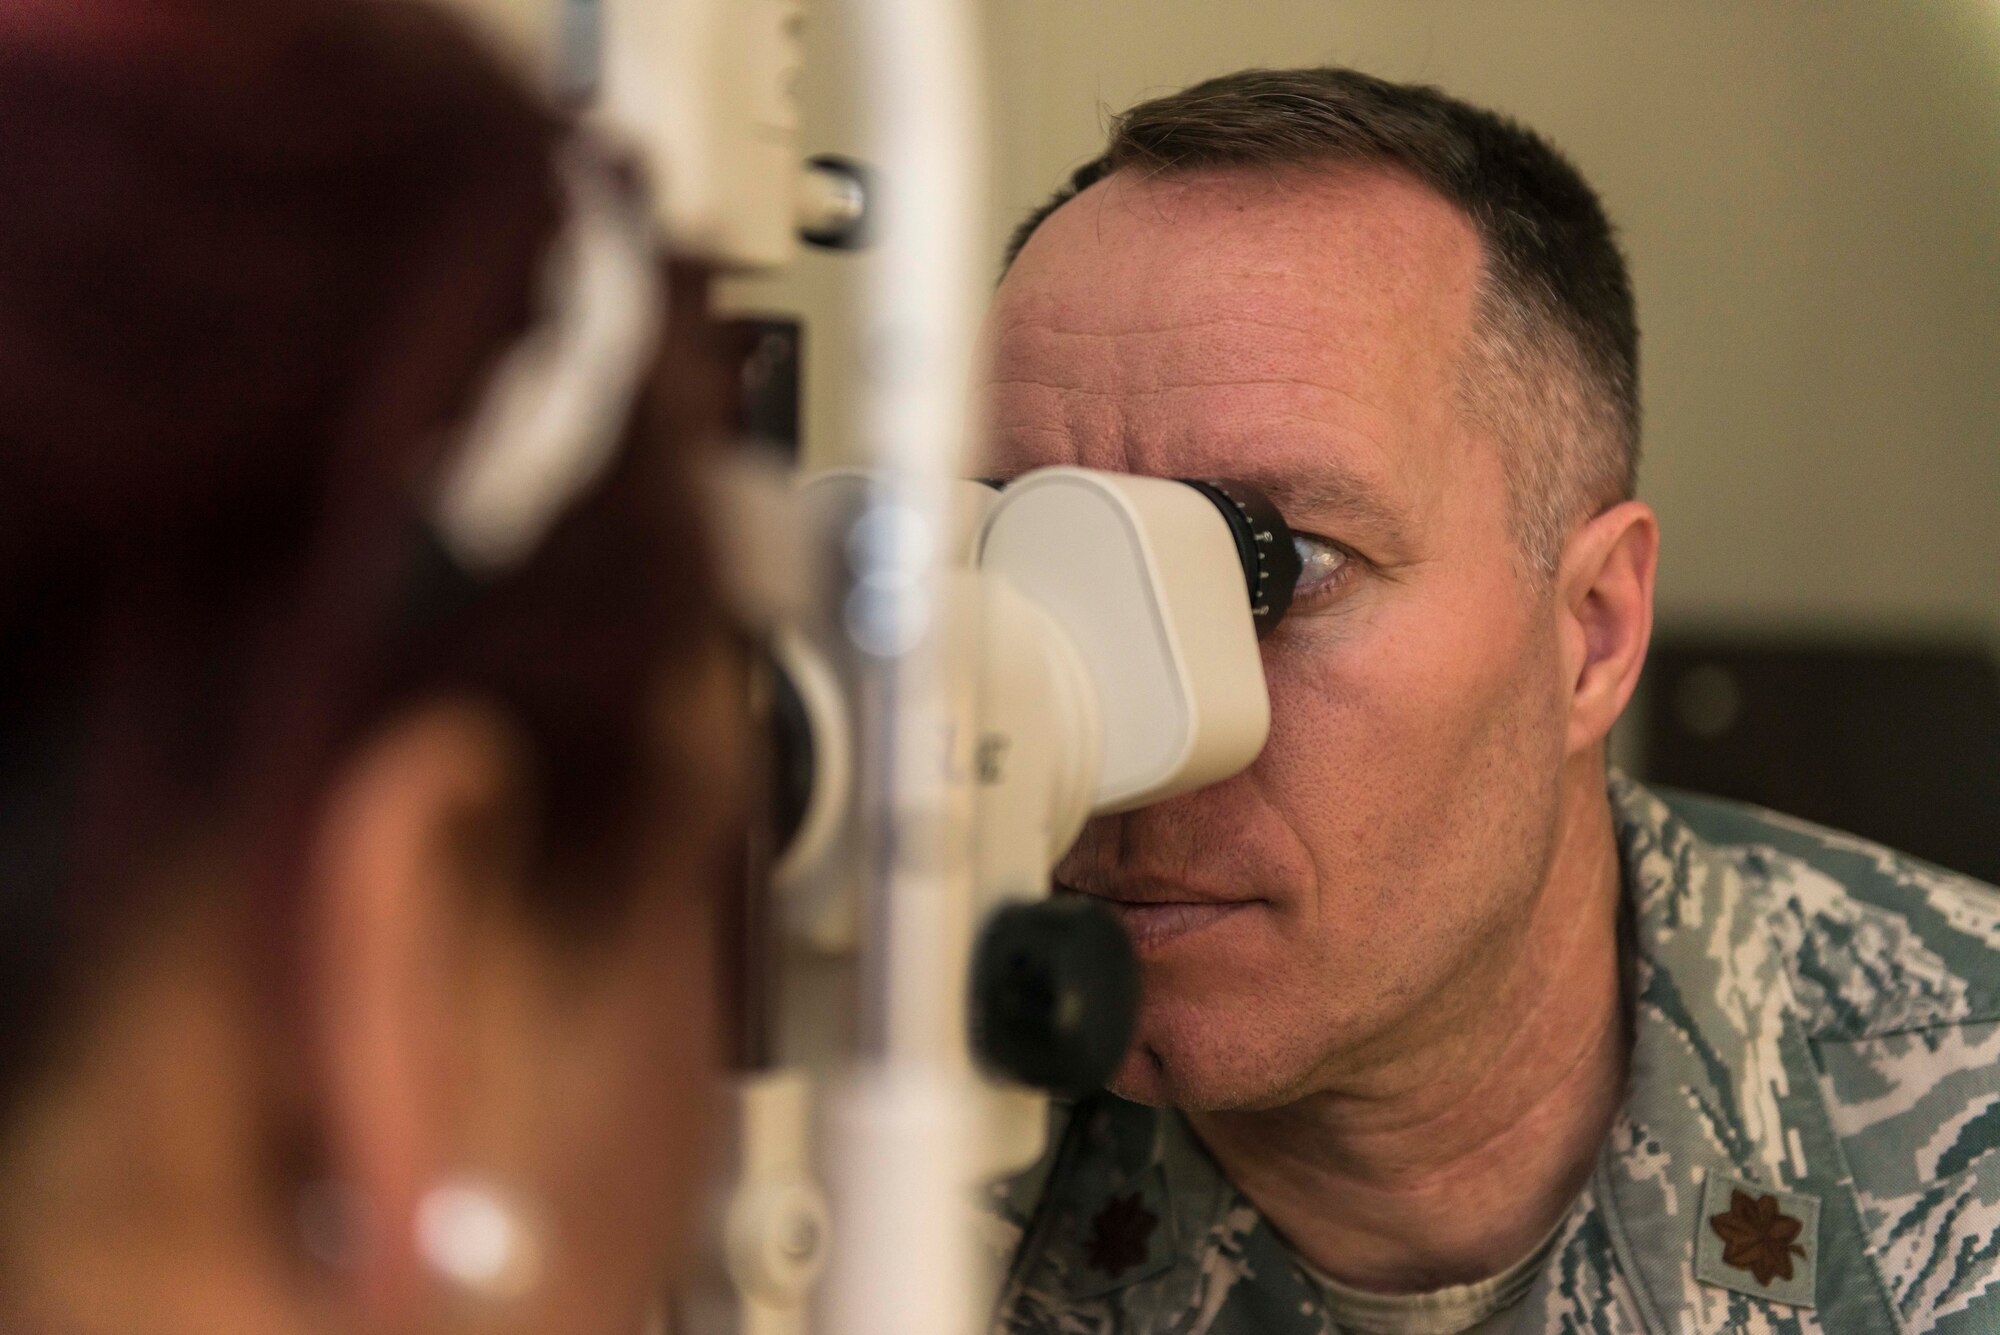 U.S. Air Force Maj. Ronny Bowman, an optometric physician with the 35th Aerospace Medicine Squadron, examines the eyes of Tina Rueb, a child youth program assistant with the Lunney Youth Center, at Misawa Air Base, Japan, Jan. 21, 2016. The physician looks for an array of different symptoms including signs of astigmatism, floaters and general retinal health. Bowman hails from Paris, Arkansas, and Reub is a Clovis, New Mexico, native. (U.S. Air Force photo by Staff Sgt. Benjamin W. Stratton)